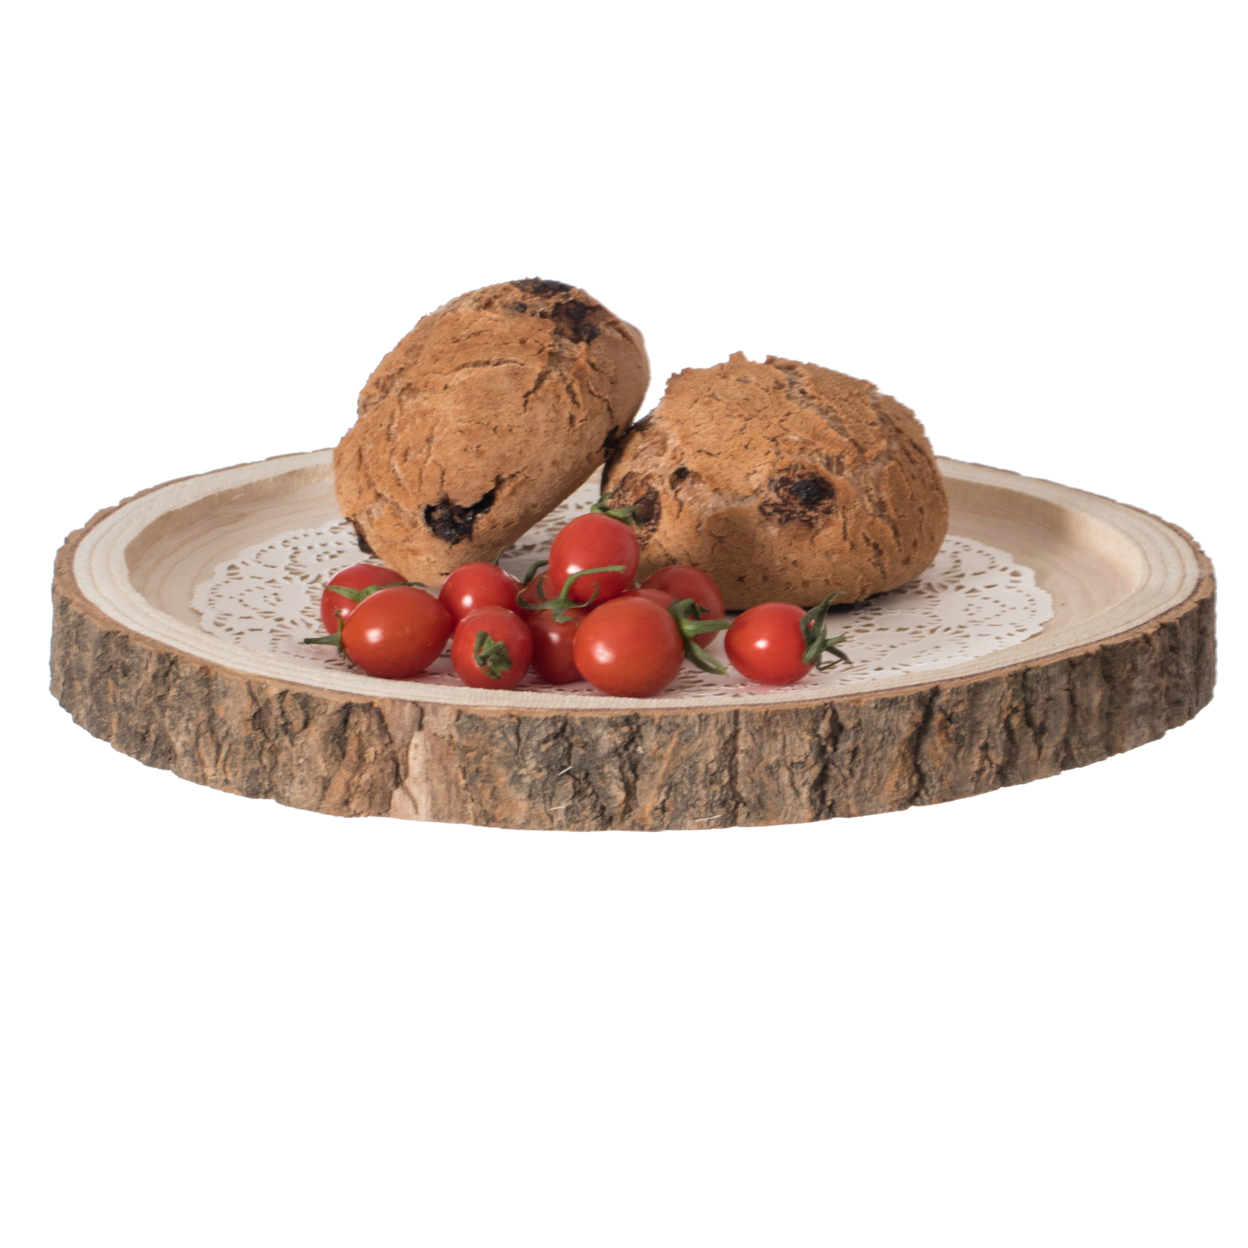 Natural Wooden Bark Round Slice Tray, Rustic Table Charger Centerpiece - 16